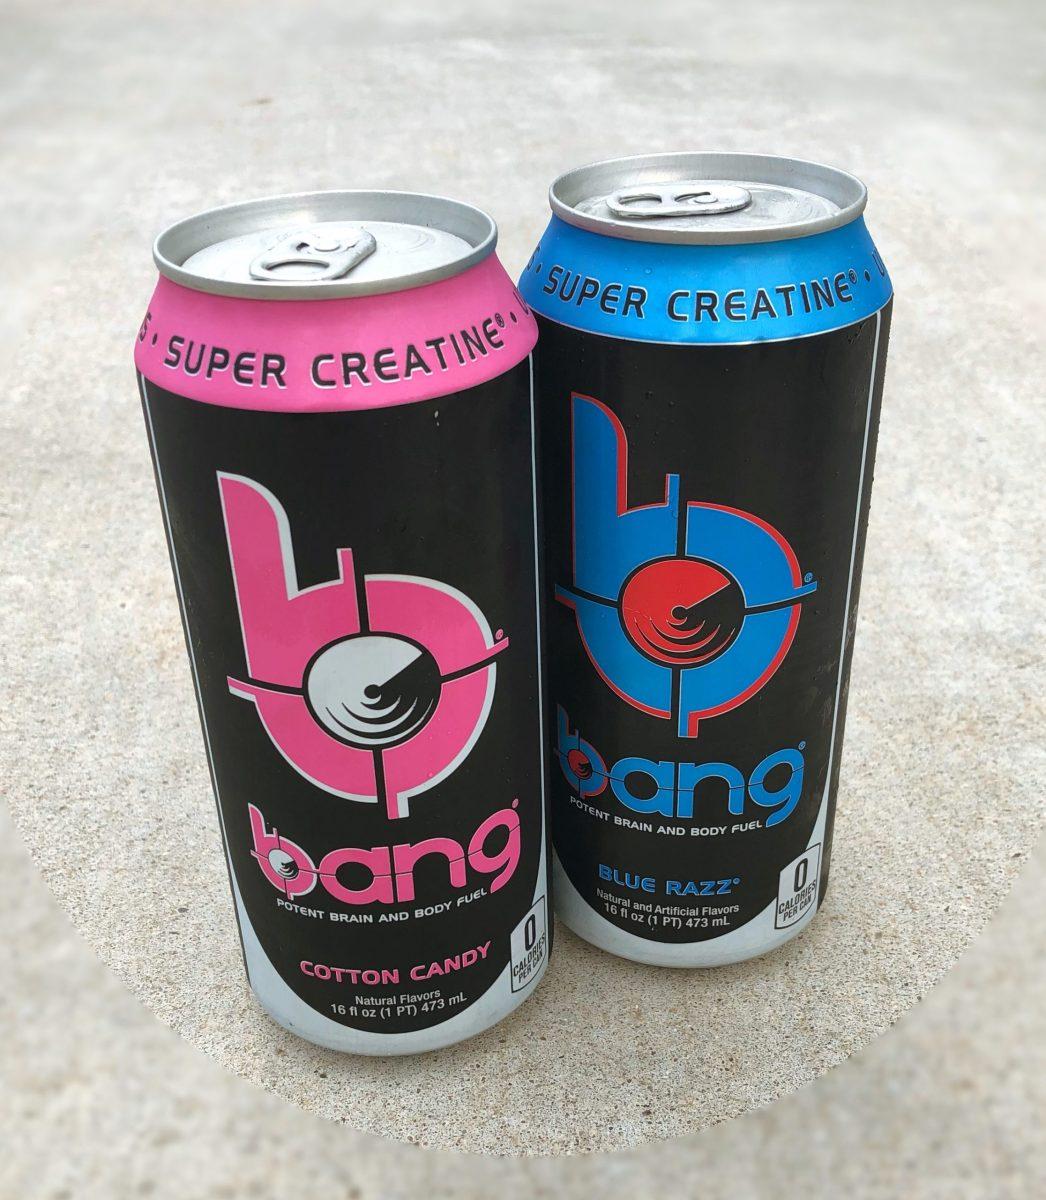 By Ryan Middlemist ’20
Bang energy drinks that have become popularized in recent years